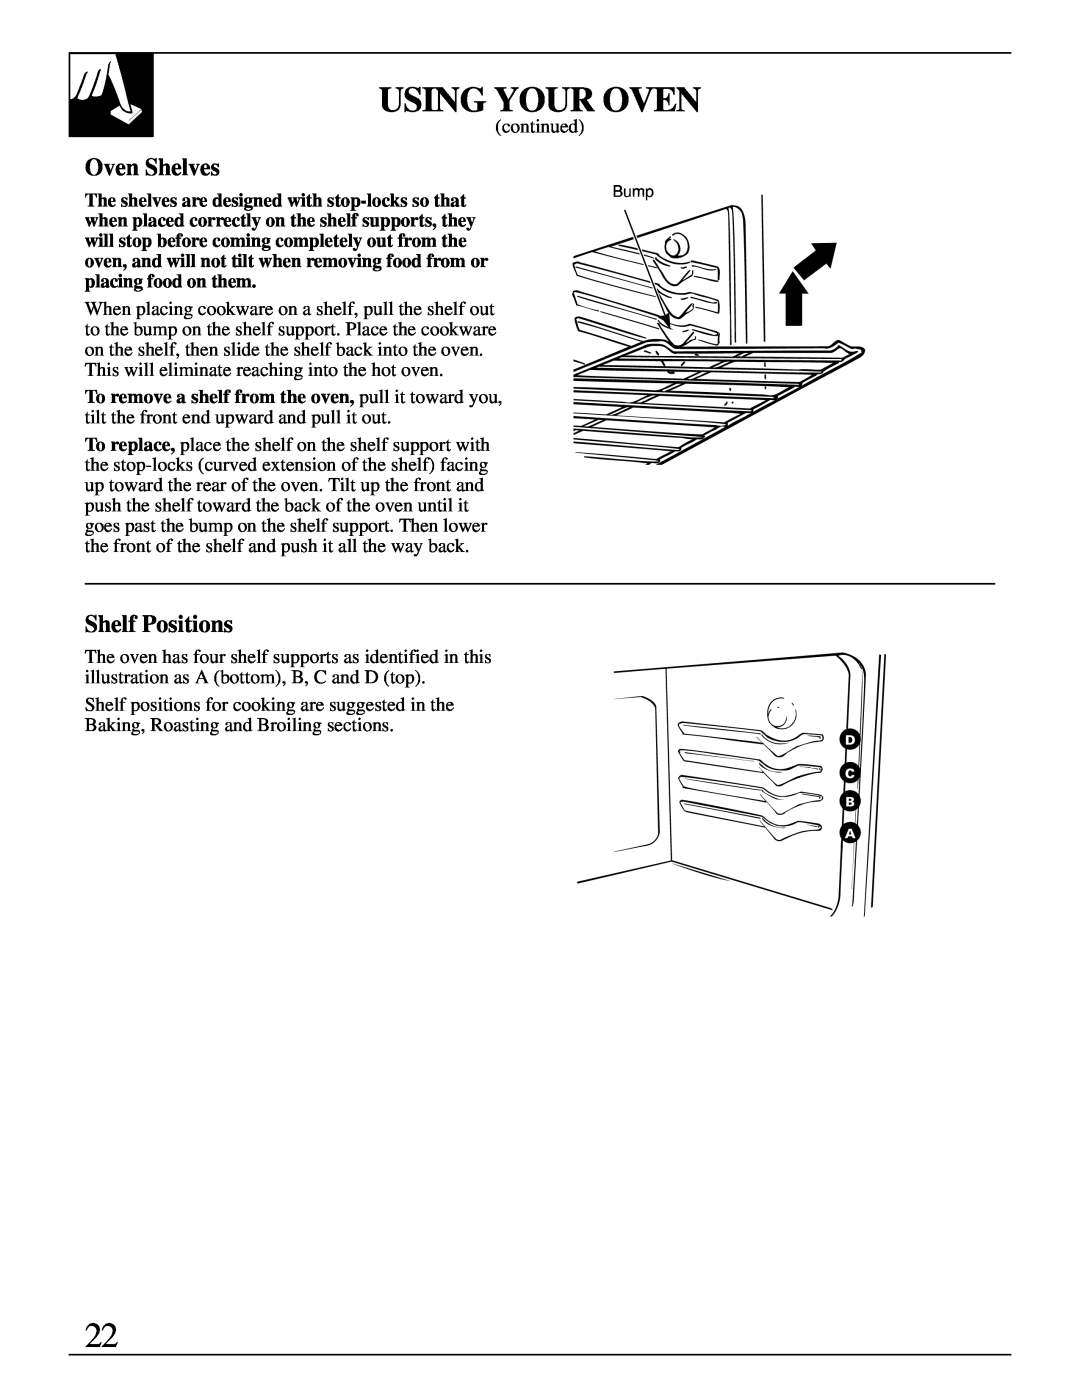 GE JBP95 Oven Shelves, Shelf Positions, Using Your Oven, continued, will stop before coming completely out from the 